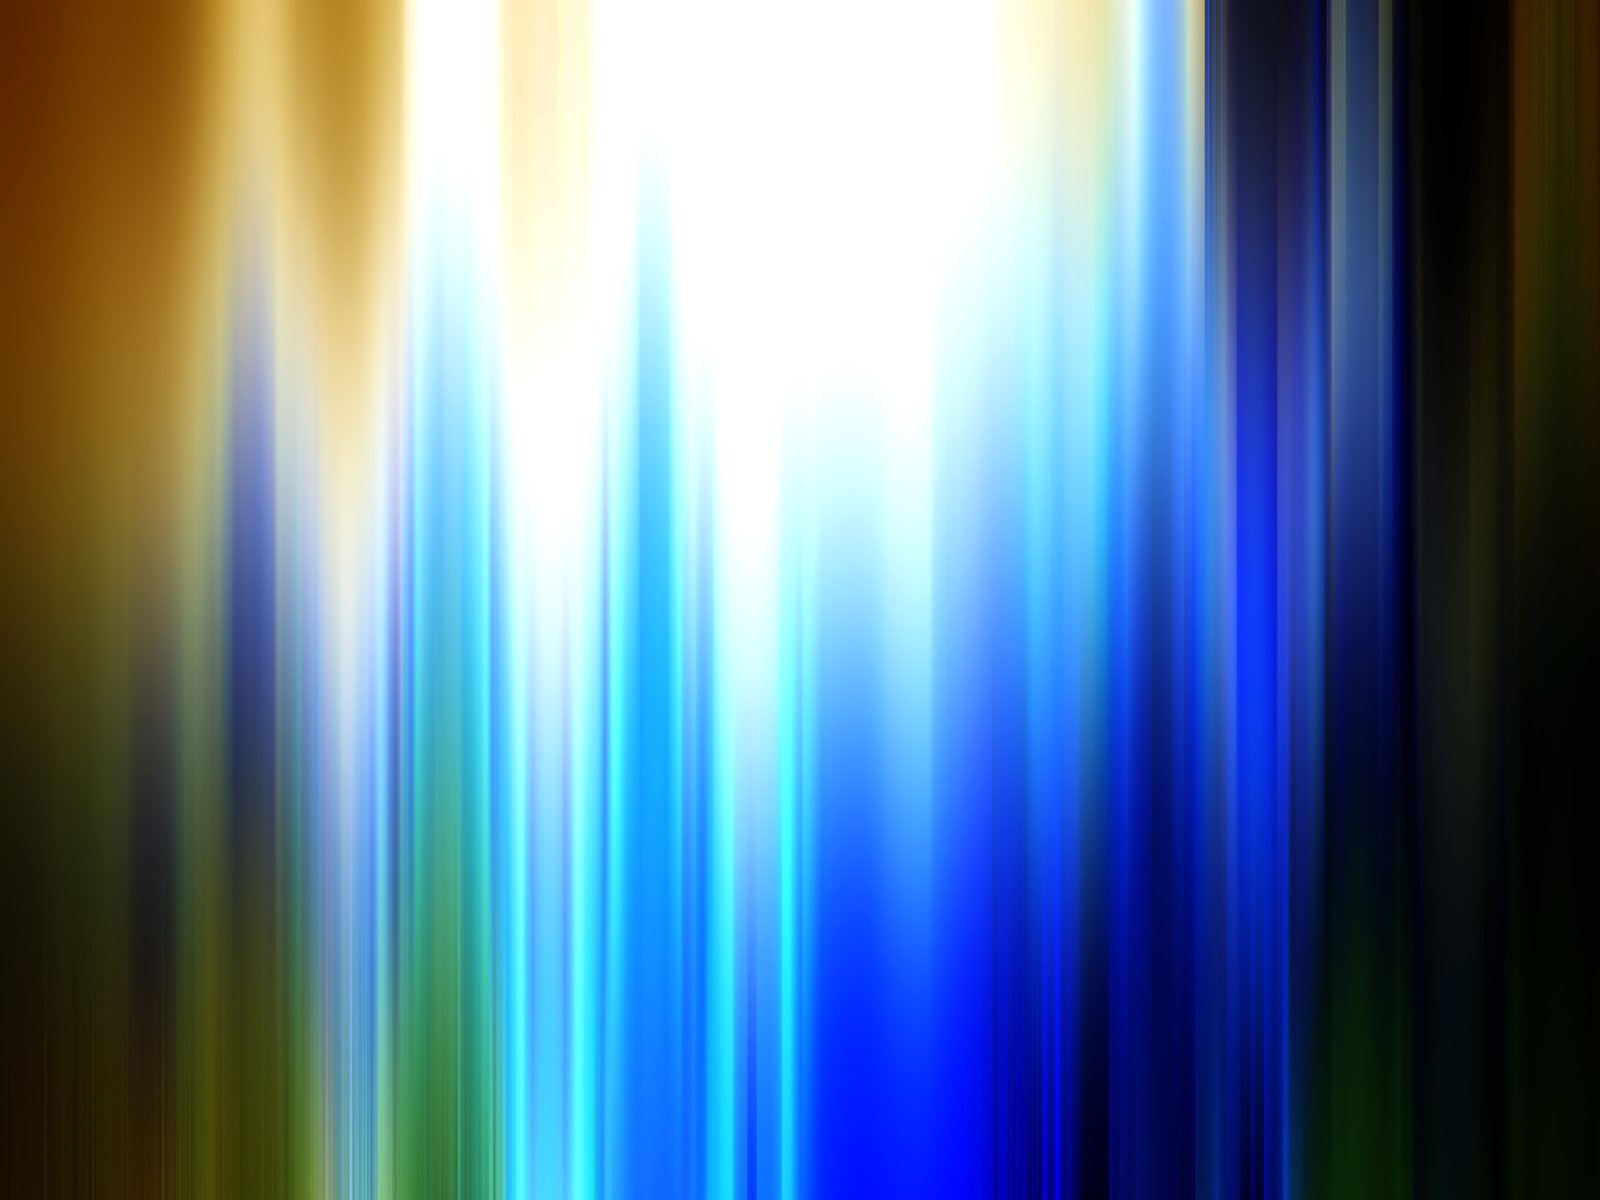 a blue and green colored abstract background